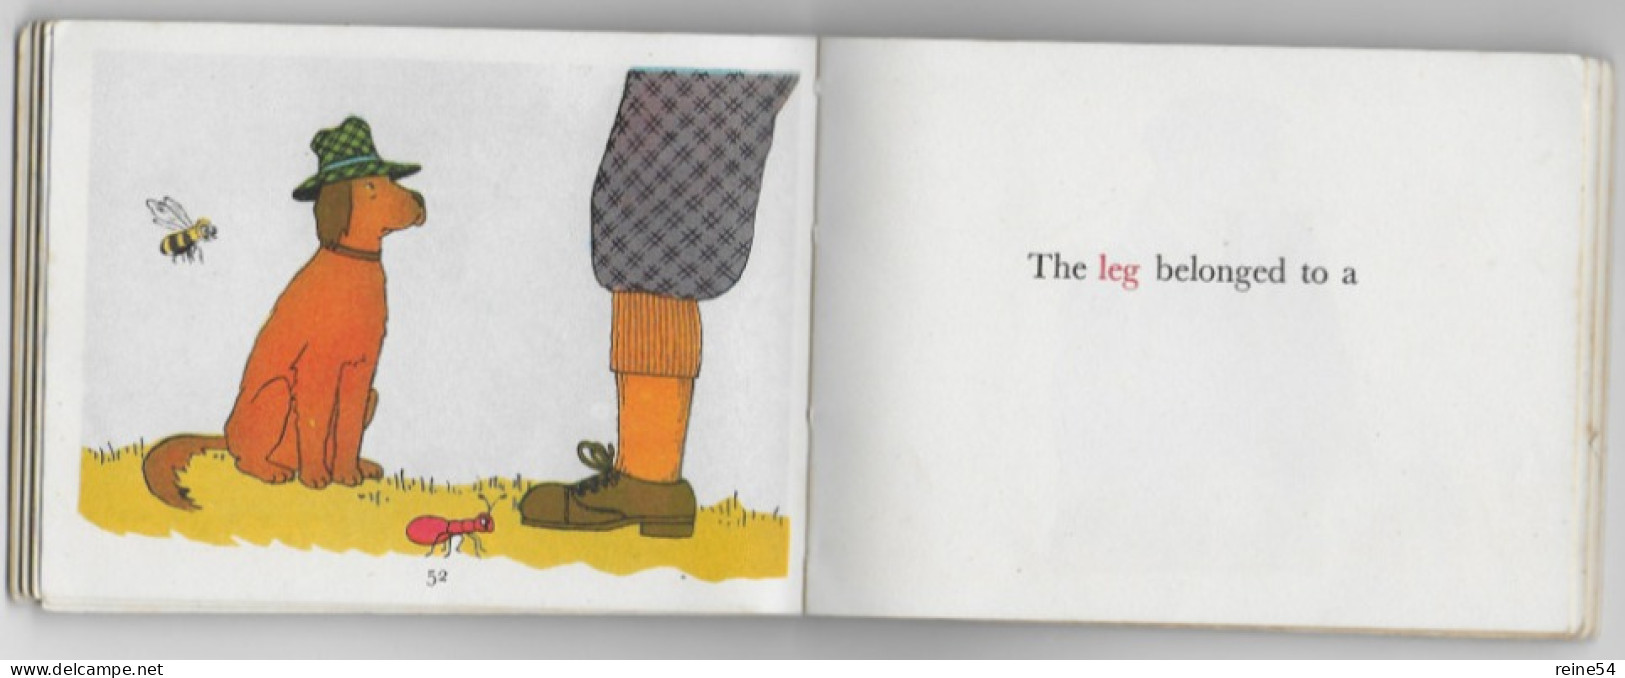 ANT And BEE -Angela BANNER -An Alphabetical Story For Tiny Tots- Edmund Ward - Libros Escolares